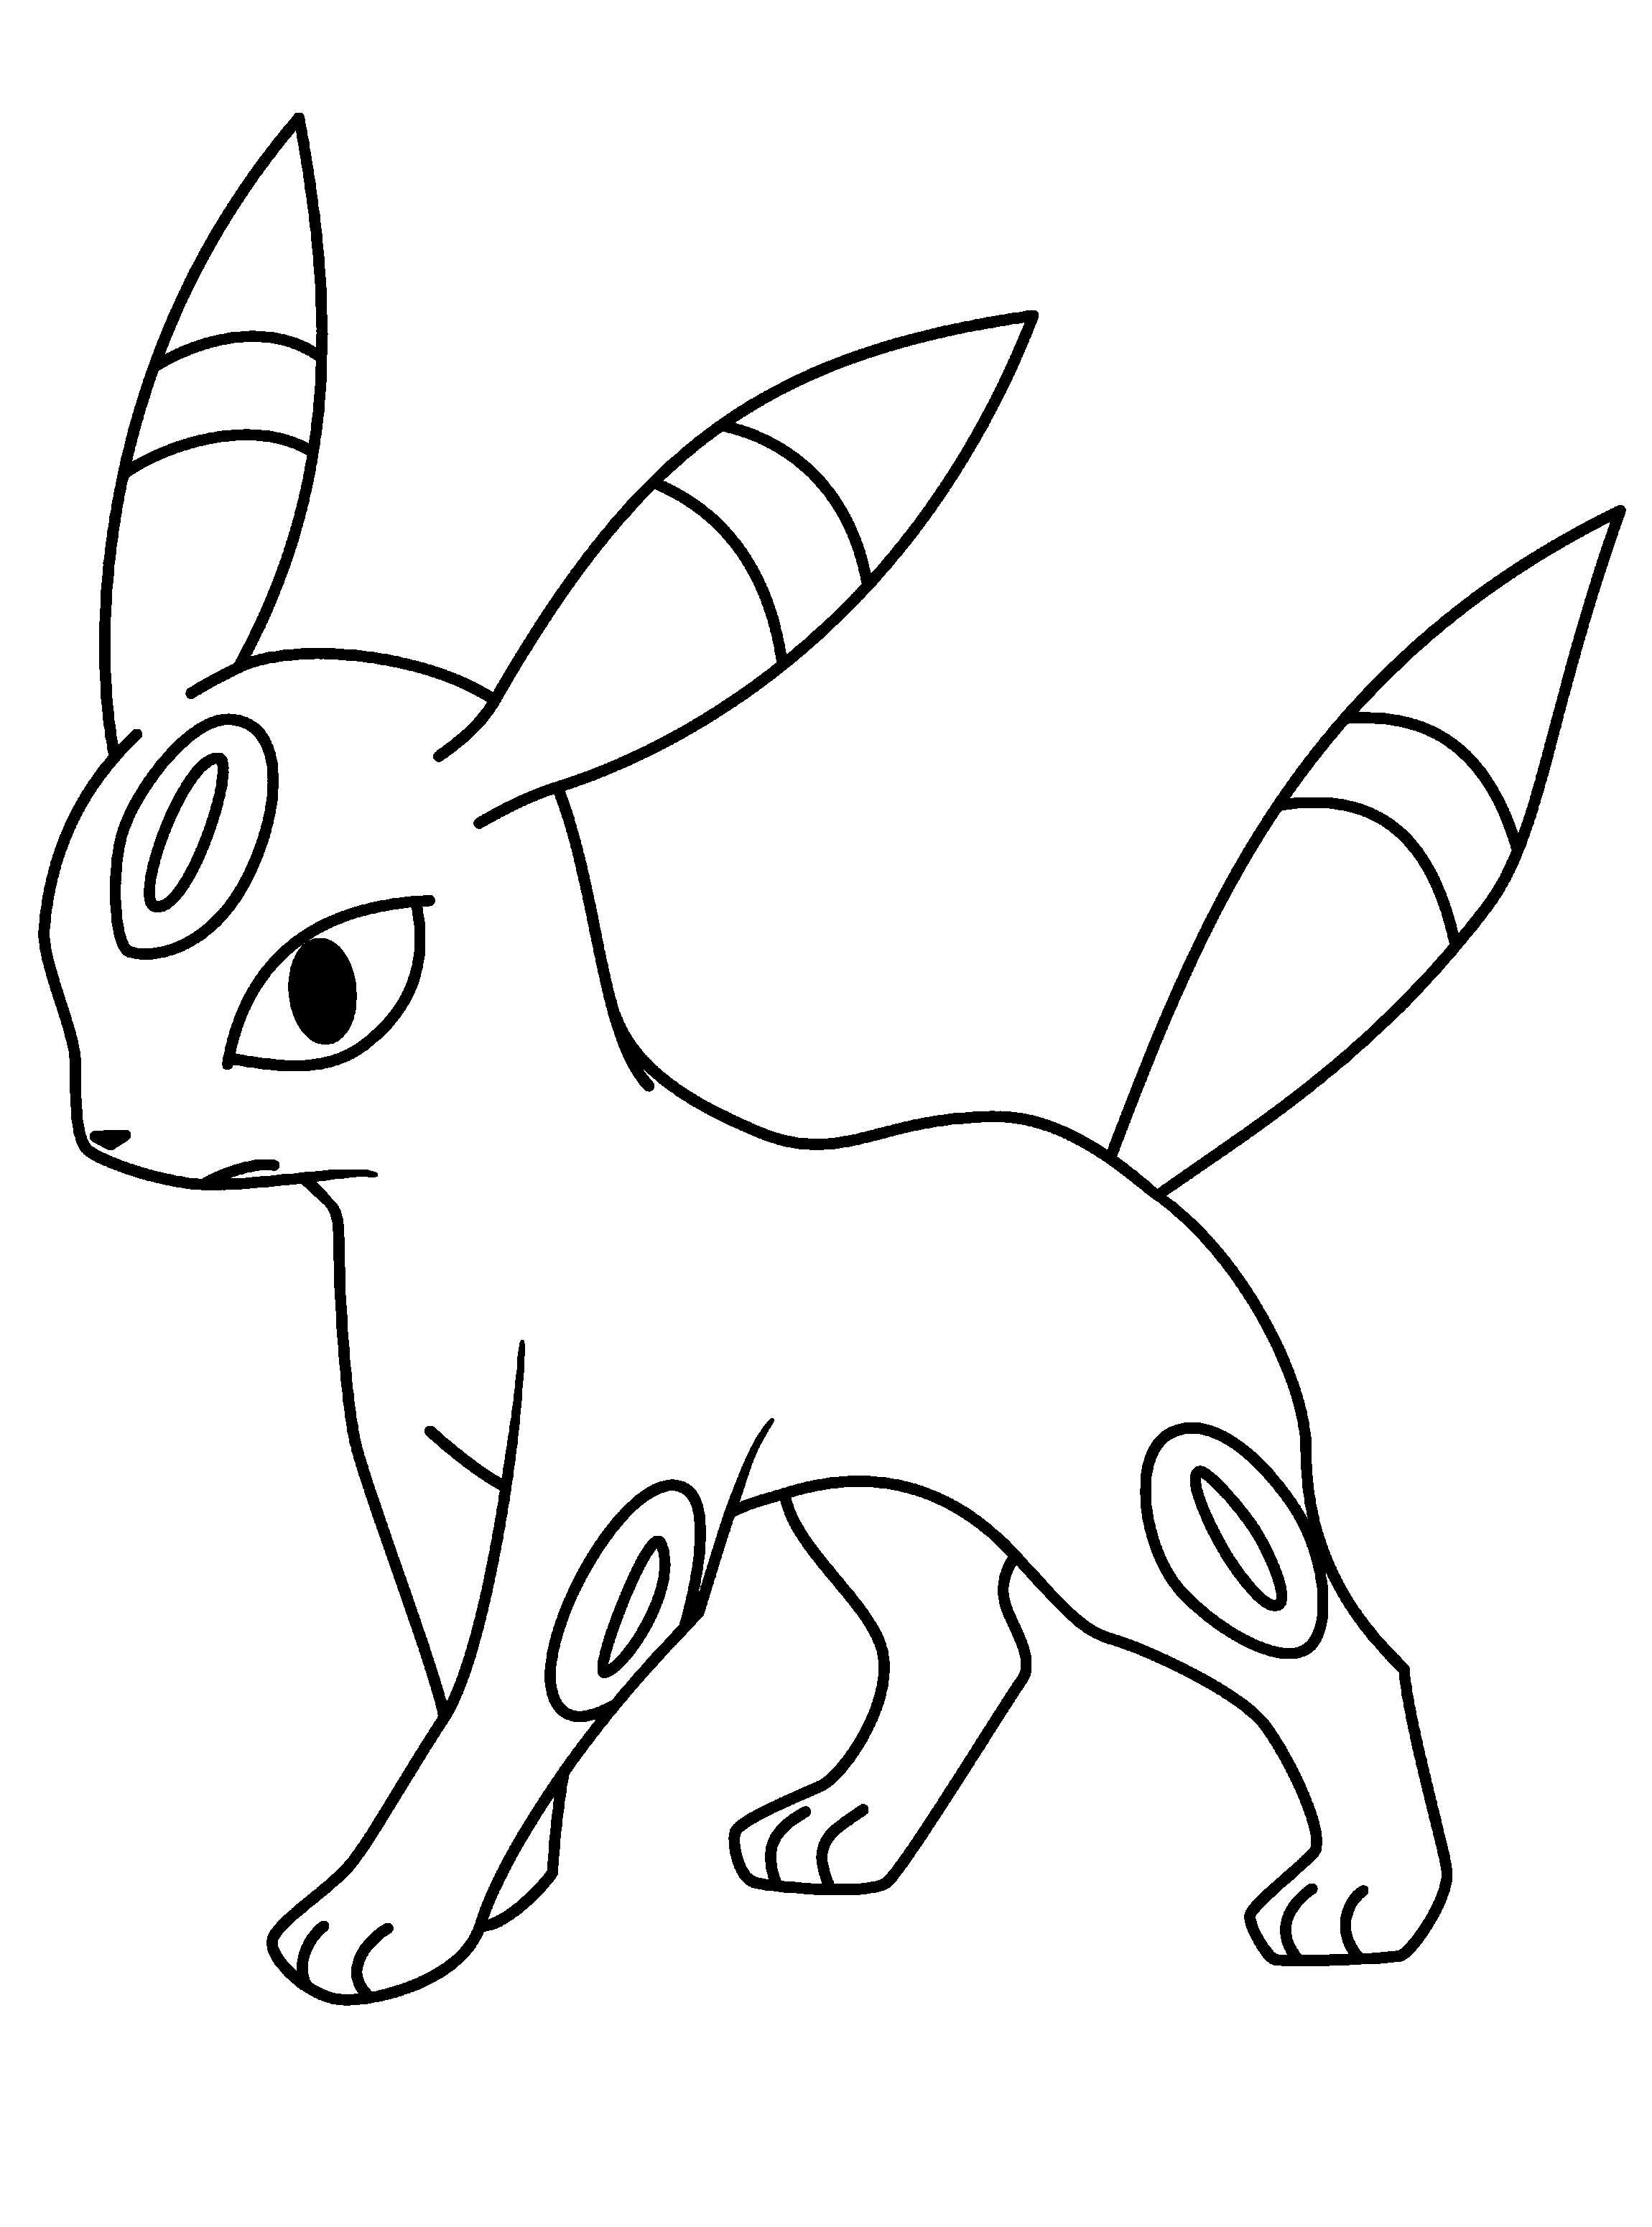 Pokemon coloring pages | Kids coloring pages | #18